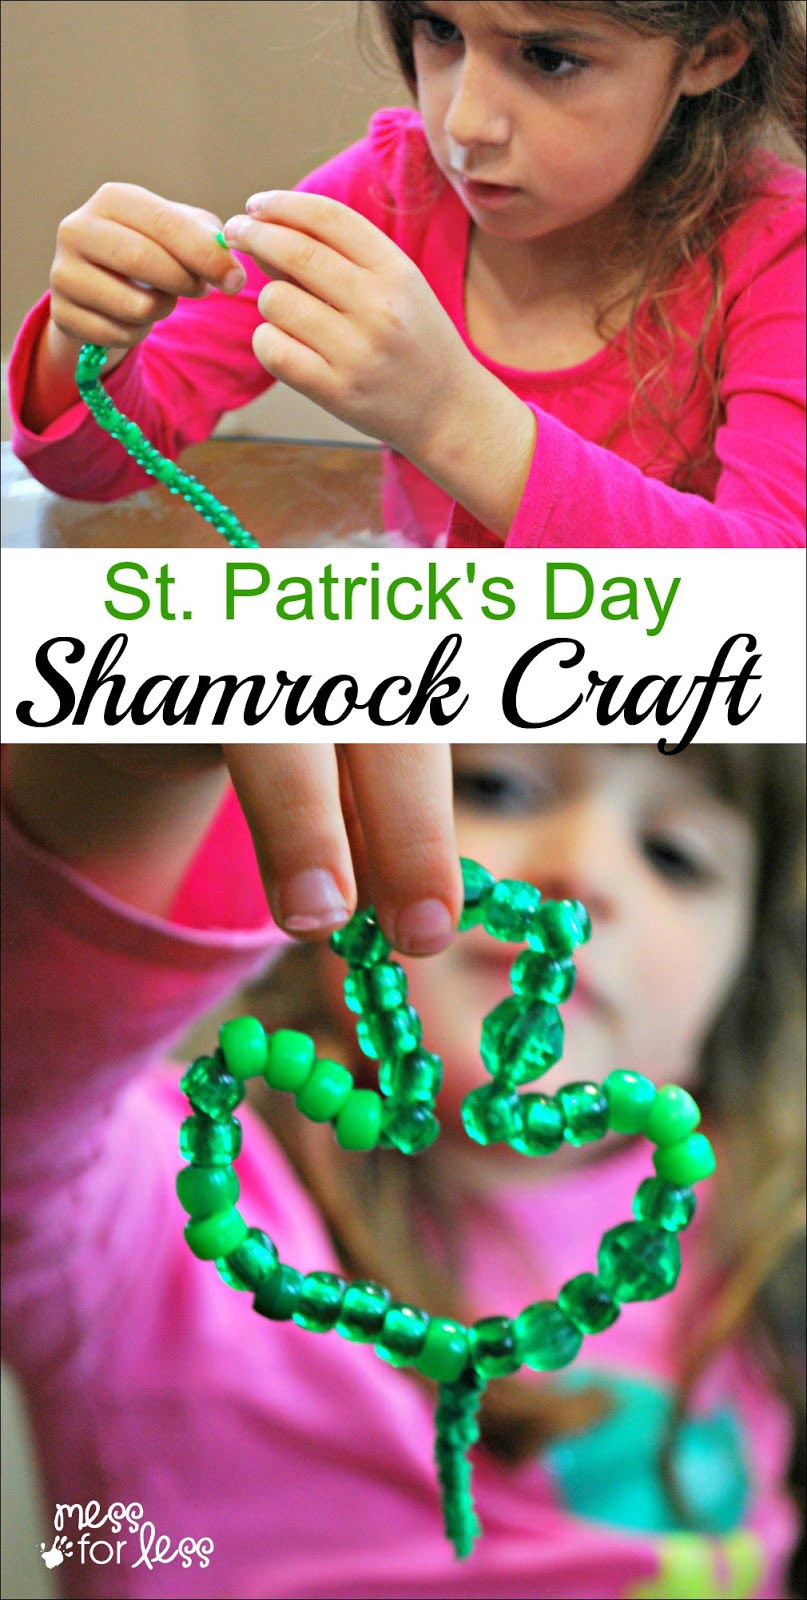 St. Patrick's Day Shamrock Craft - Mess For Less